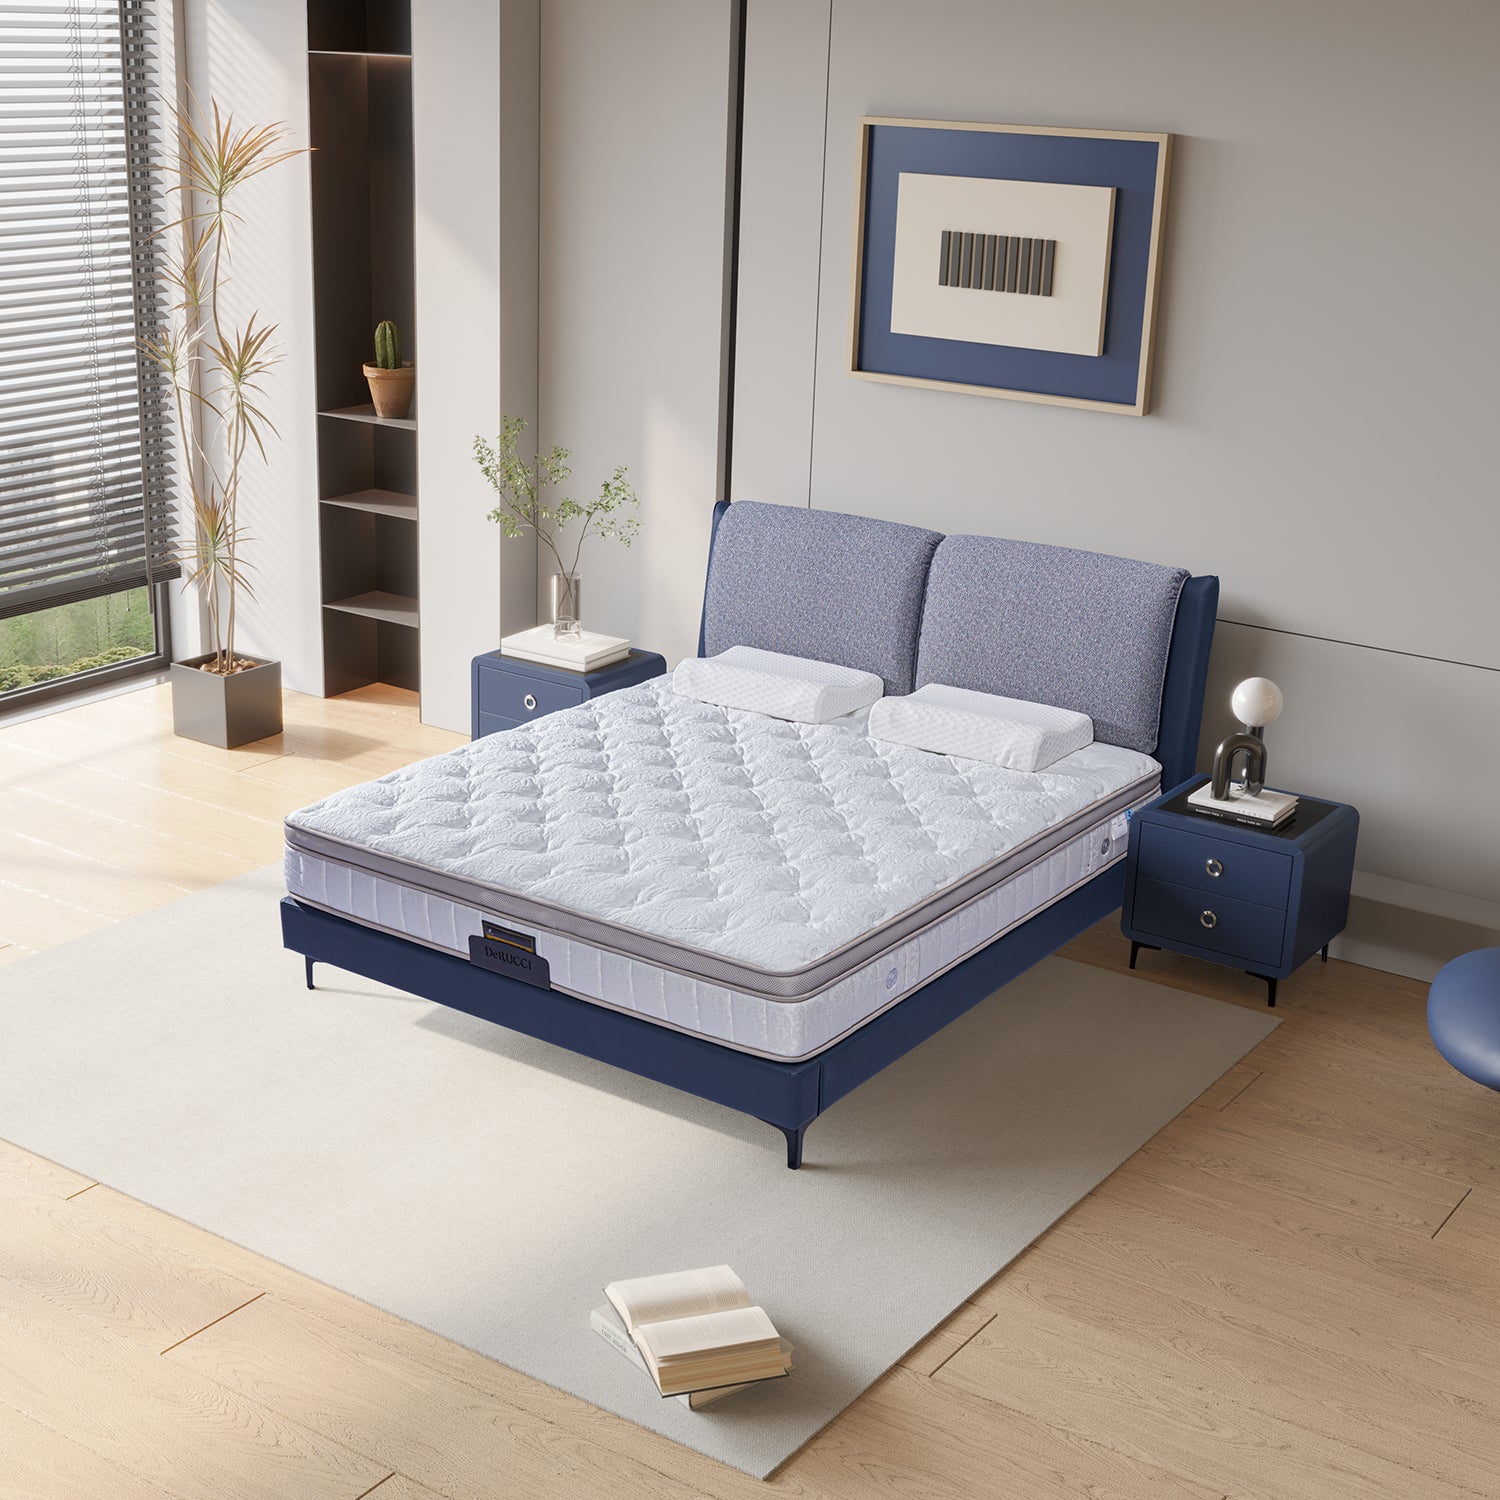 DeRUCCI Bed Frame BOC1 - 017 in blue fabric, modern bedroom setup with pillows, mattress, navy nightstands, minimalist decor, and natural light.